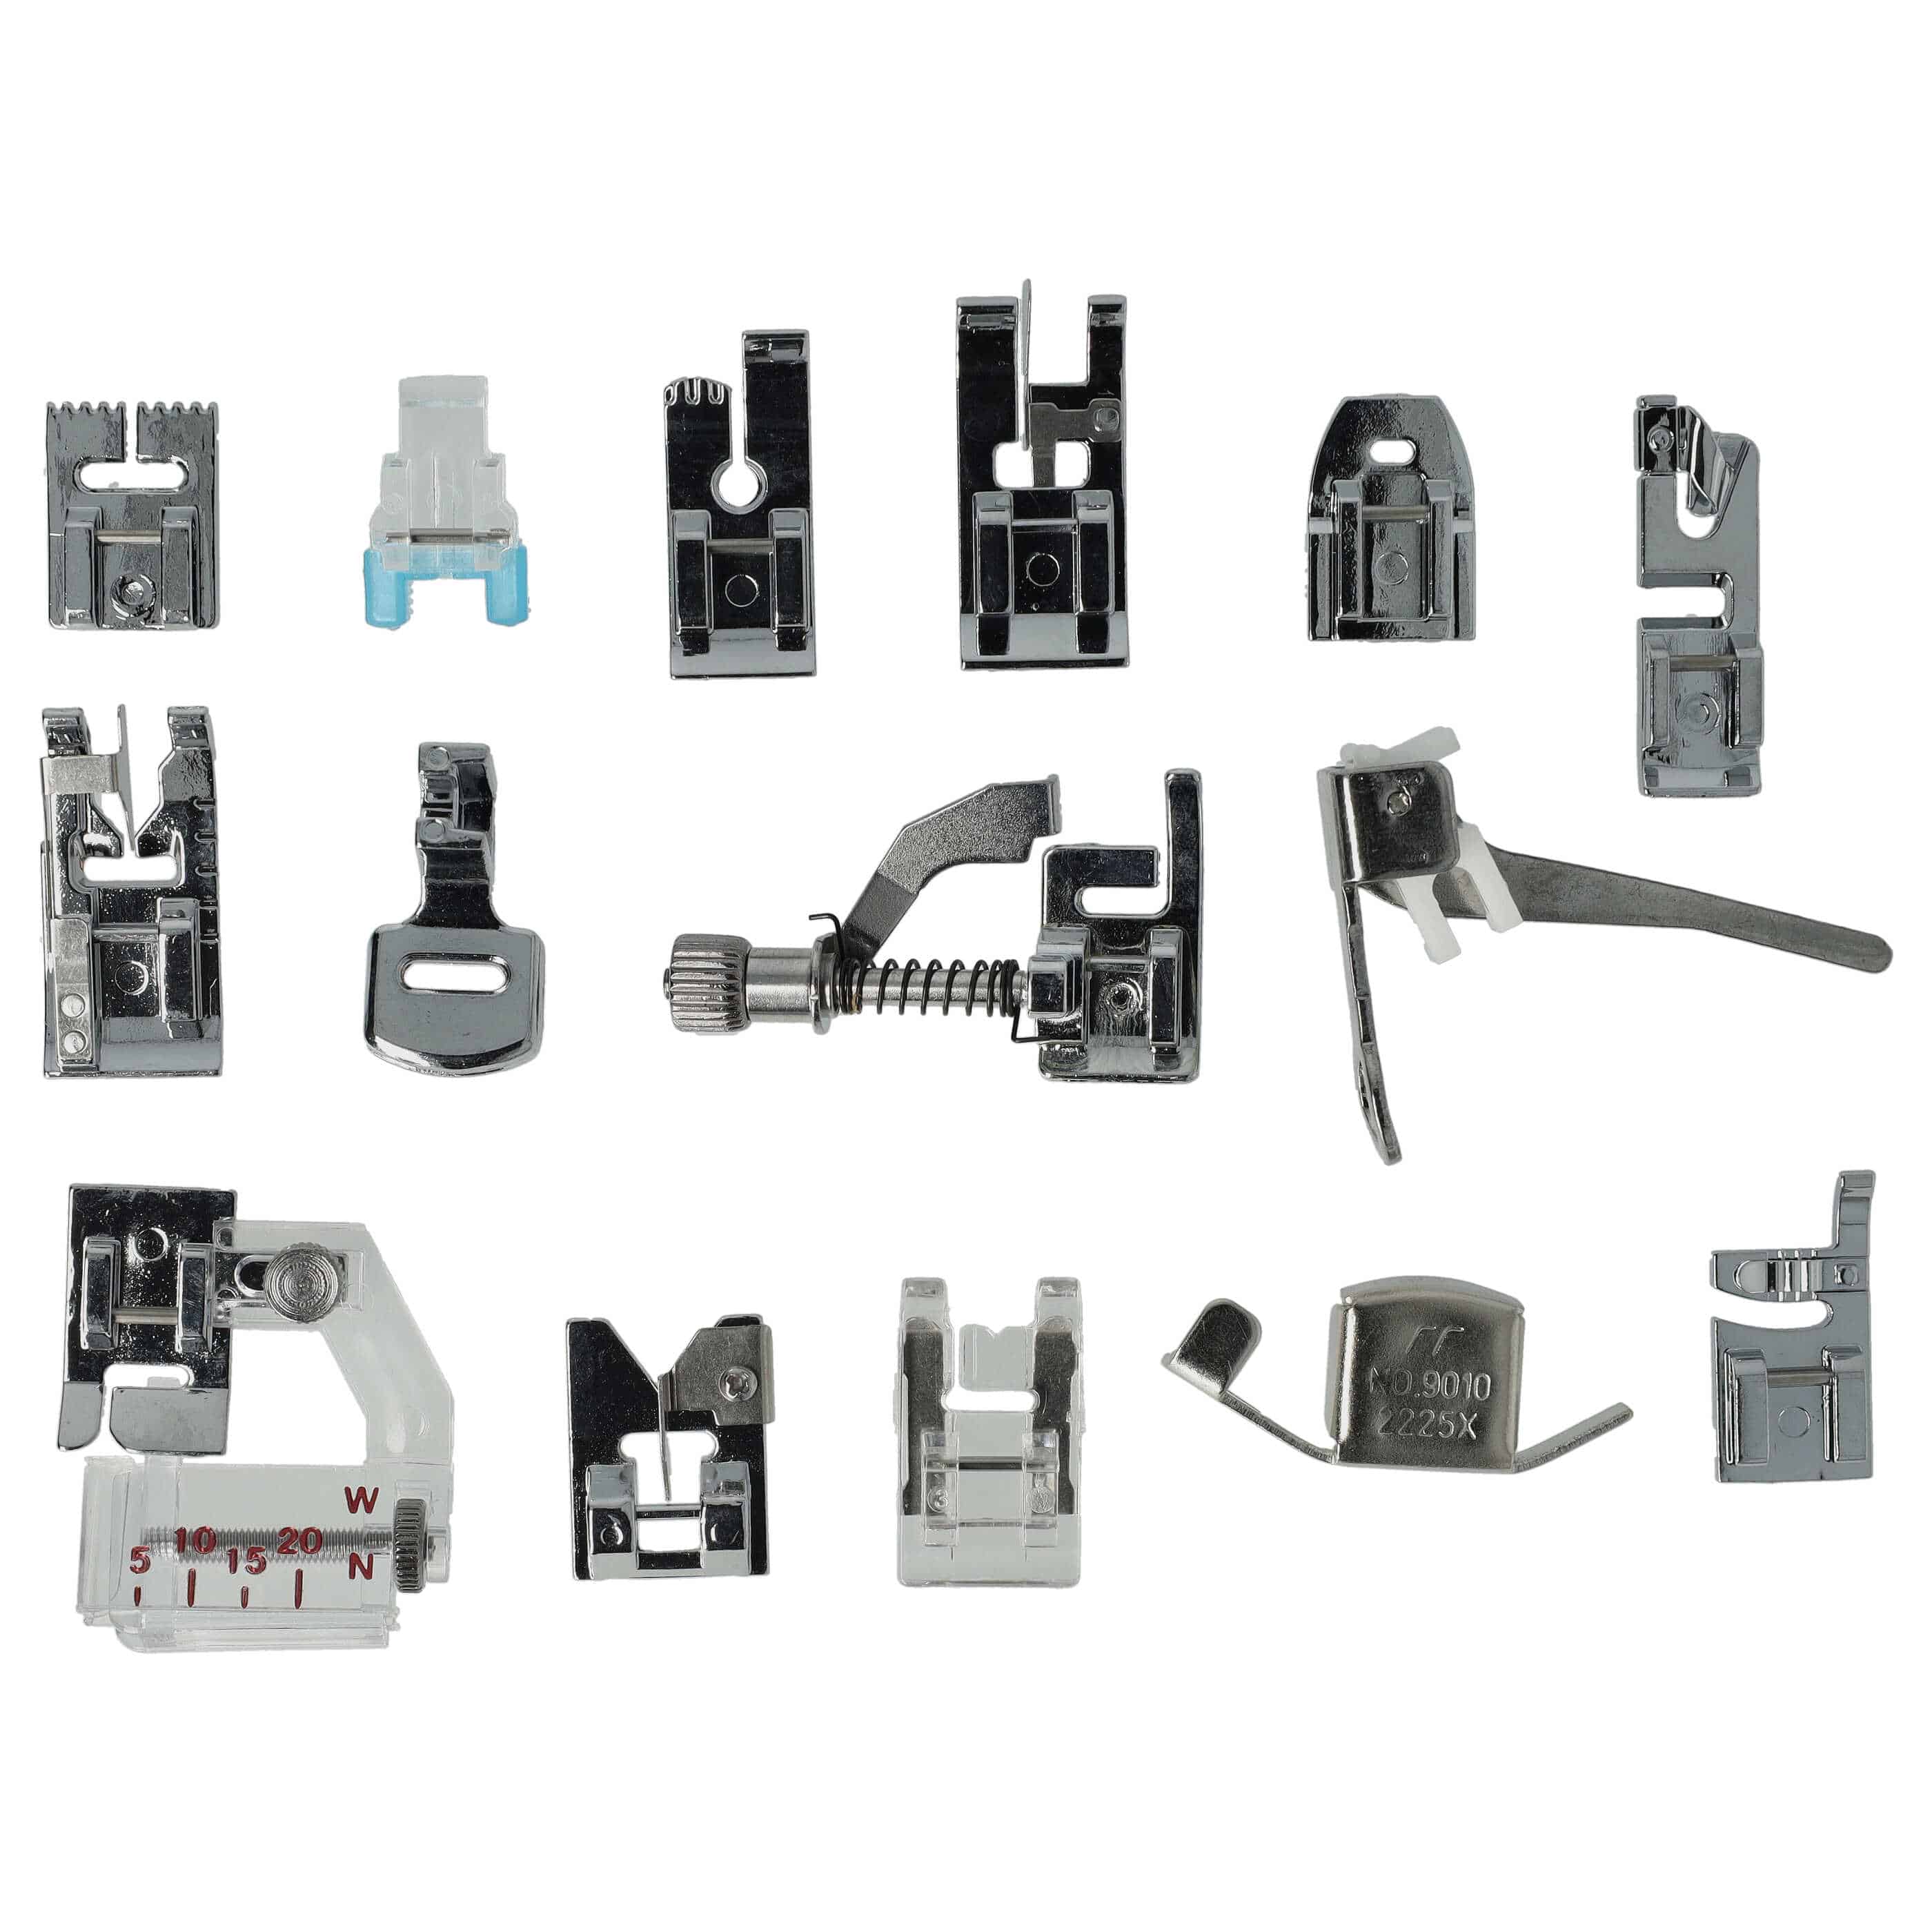 vhbw 15-Part Sewing Machine Presser Feet Set for Standard Sewing Machines with with Low Shank - Universal Sewi